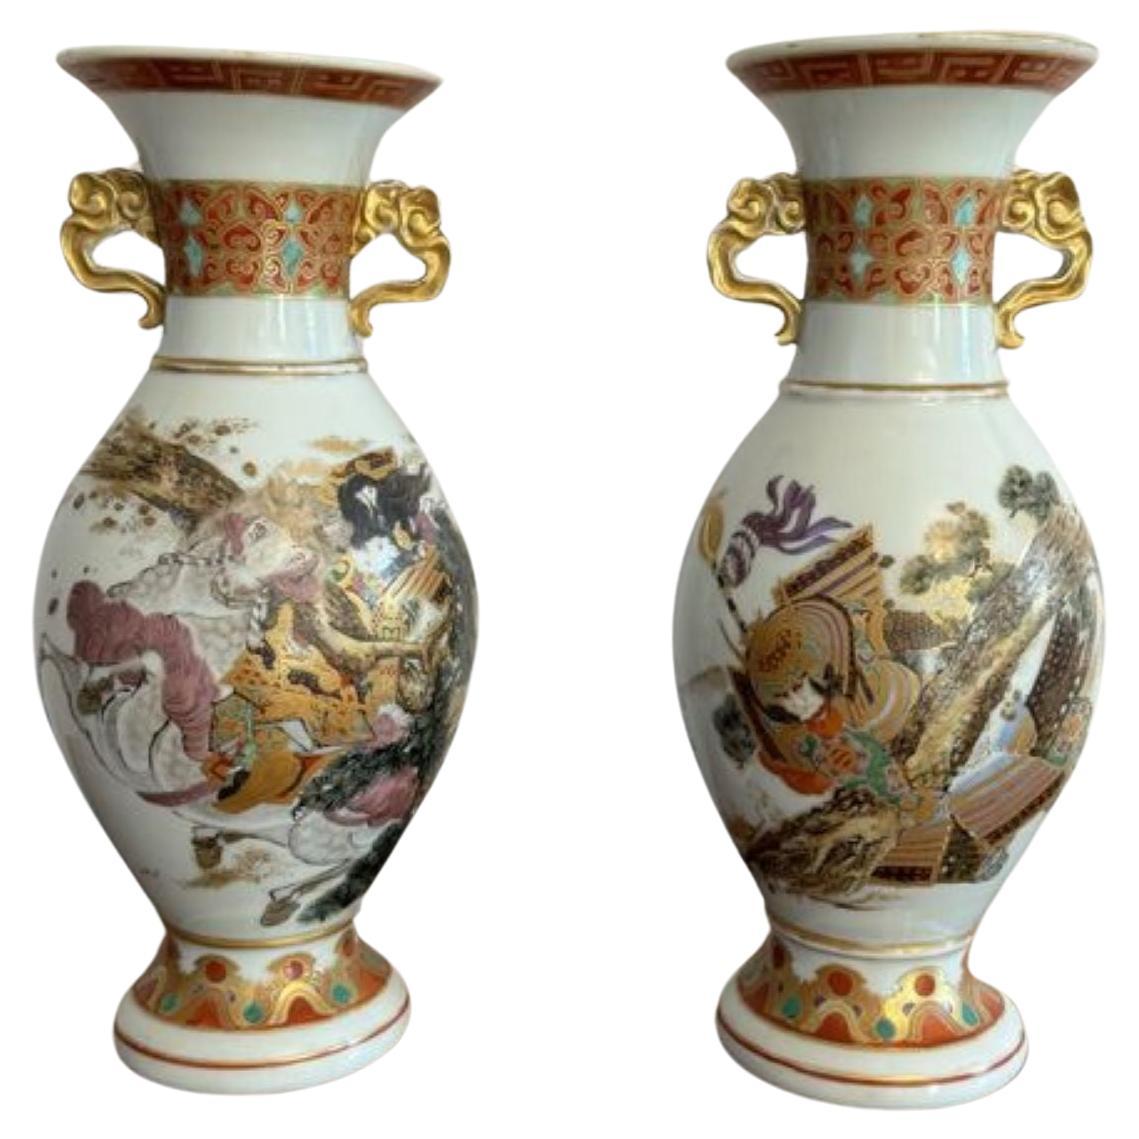 Superb quality pair of antique 19th century porcelain Chinese famille vercv vase For Sale